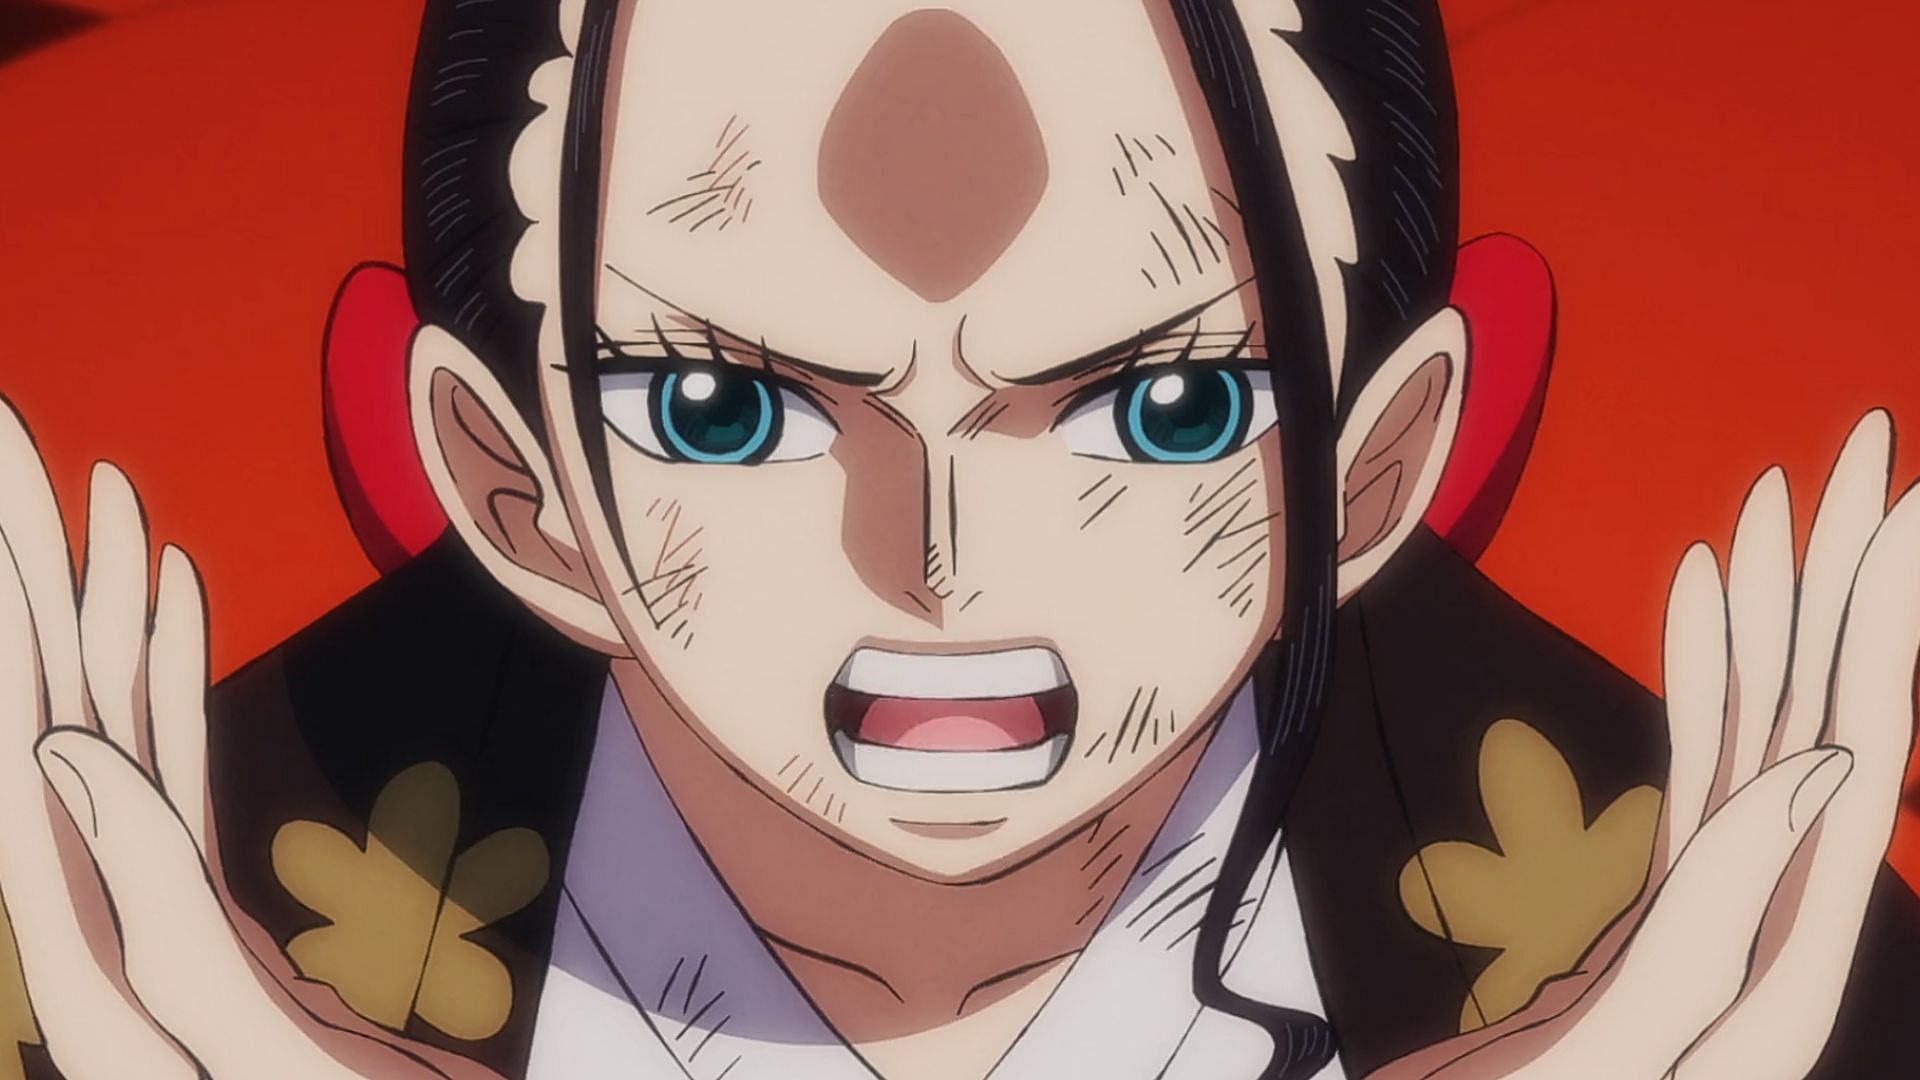 One Piece episode 1058: Zoro fights King, Kazenbo sets everything on fire,  and a mysterious woman plays the shamisen